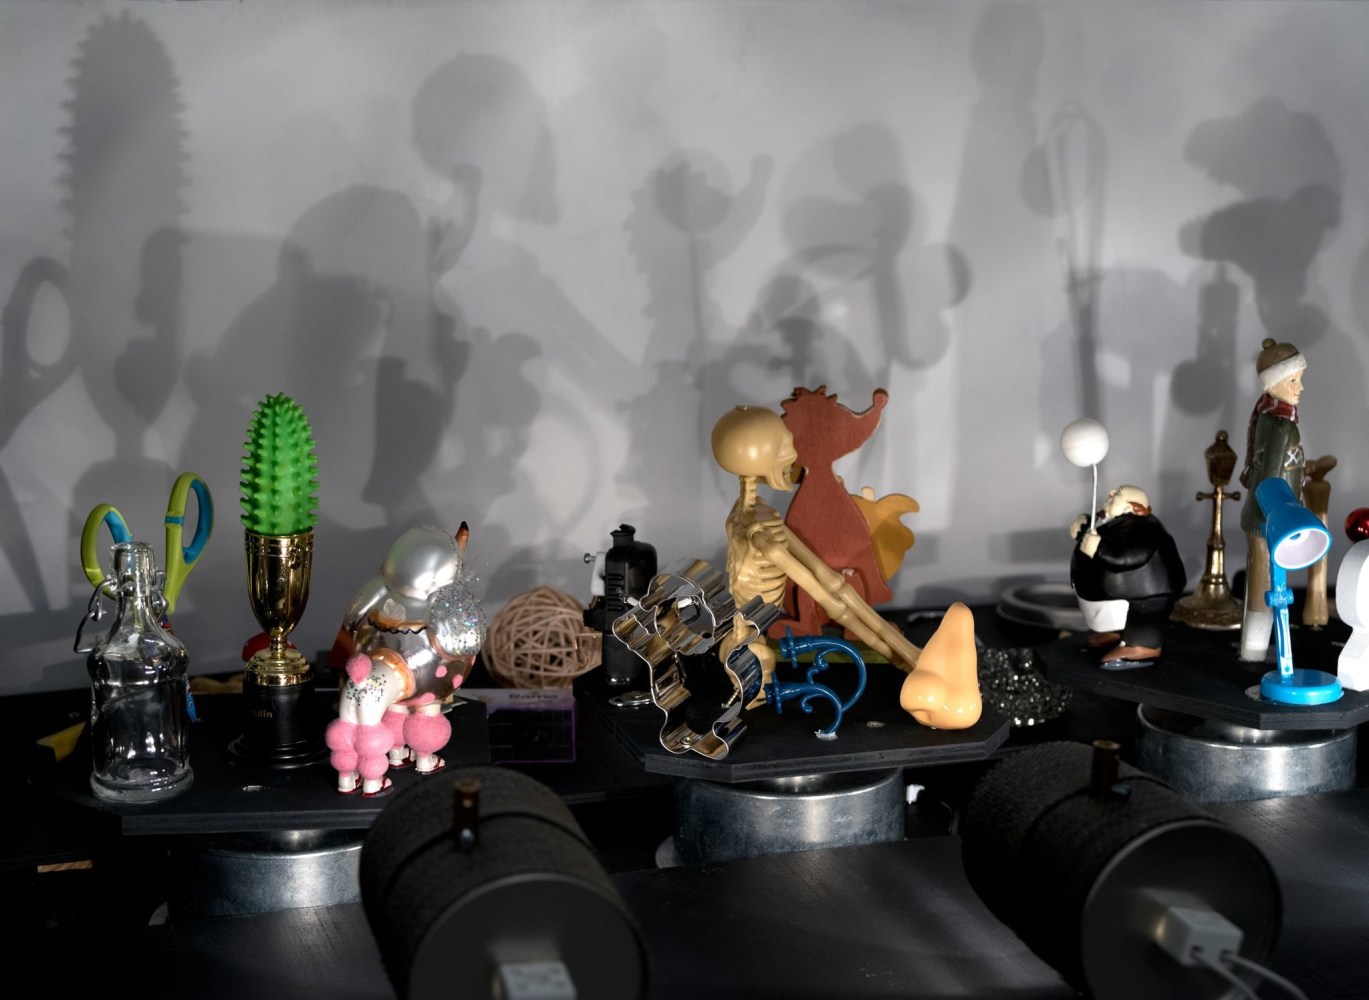 Hans-Peter Feldmann

Pocket Shadow Play

4 mechanical rotating discs on wood desk, lamps, various objects

52 1/2 x 40 1/2 x 32 inches (133 x 102.5 x 81.5 cm)

HPF 444

&amp;nbsp;

INQUIRE